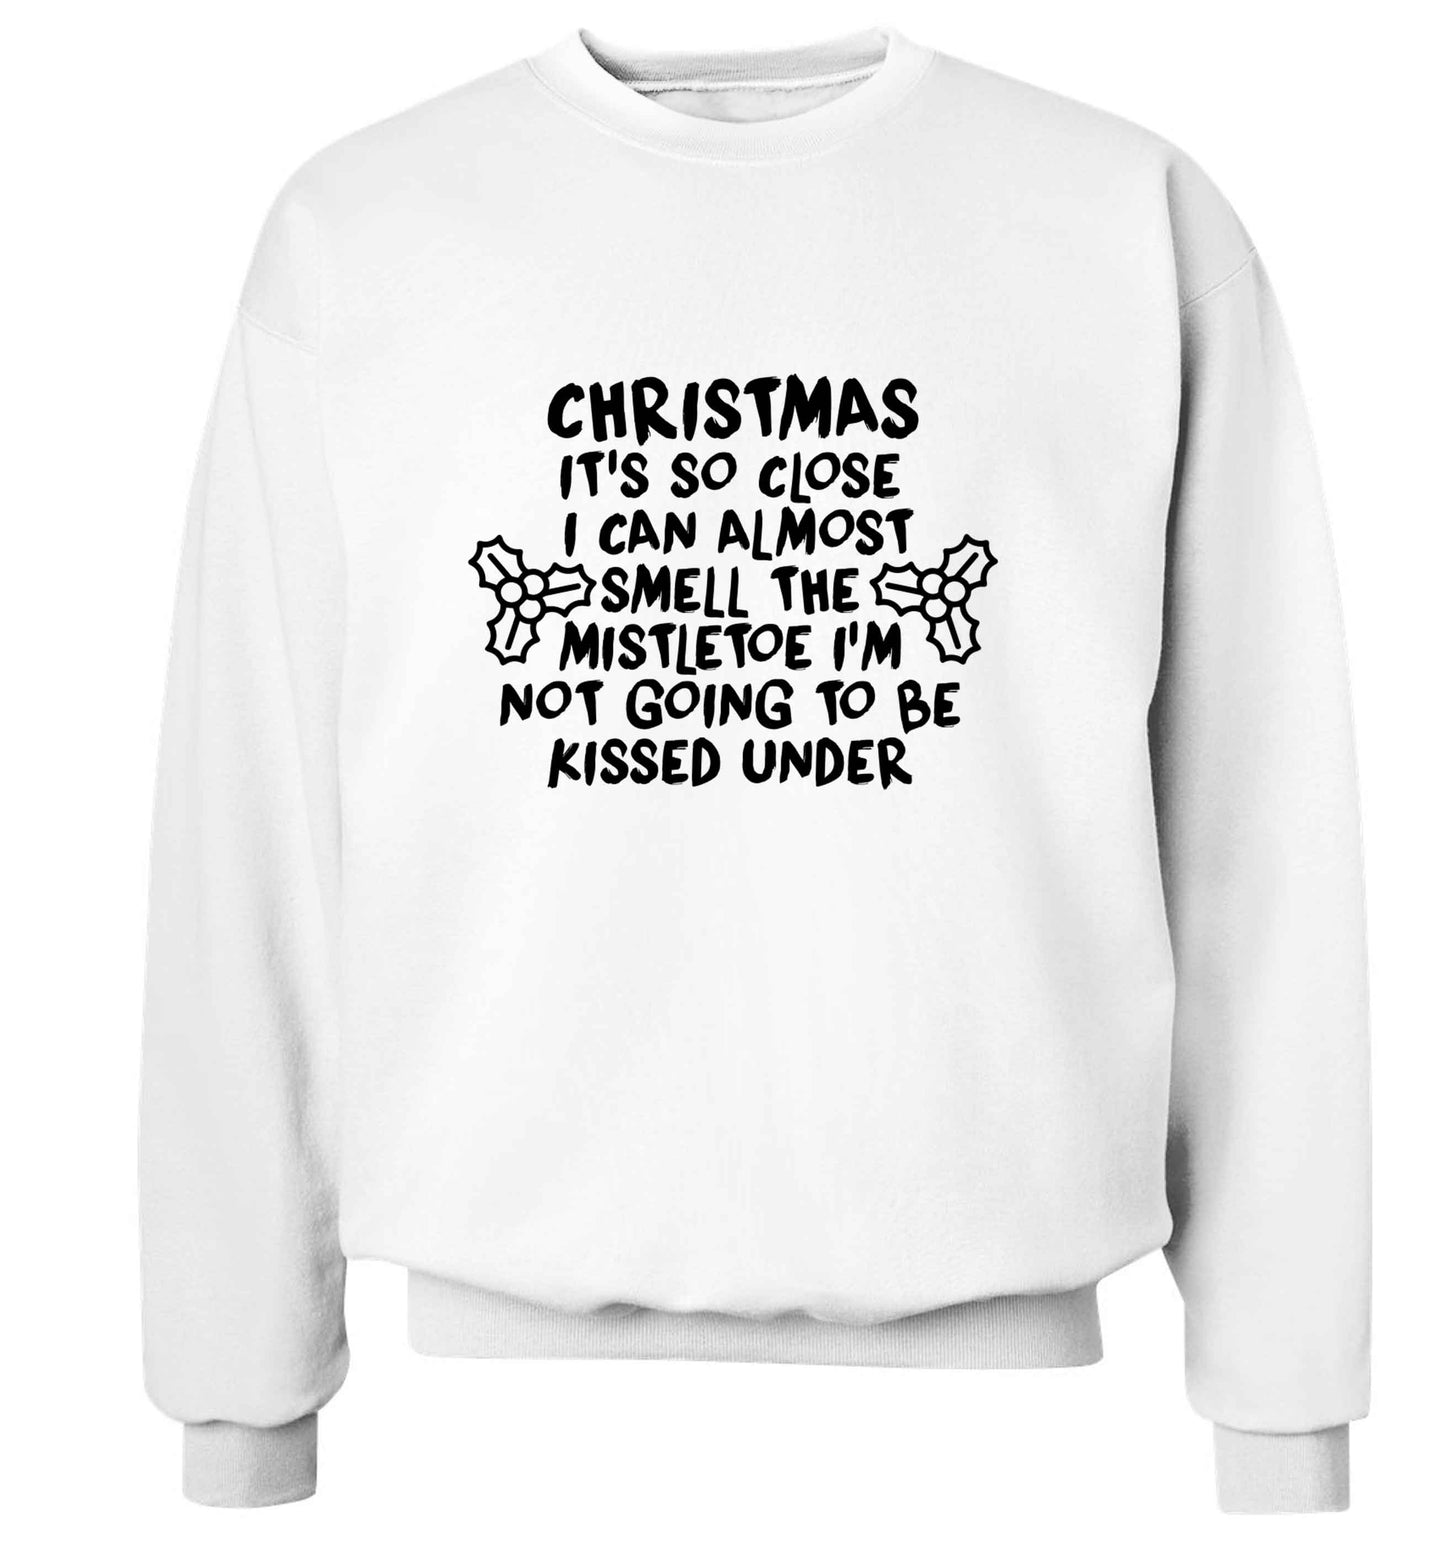 Christmas it's so close I can almost smell the misteltoe I'm not going to be kissed under adult's unisex white sweater 2XL